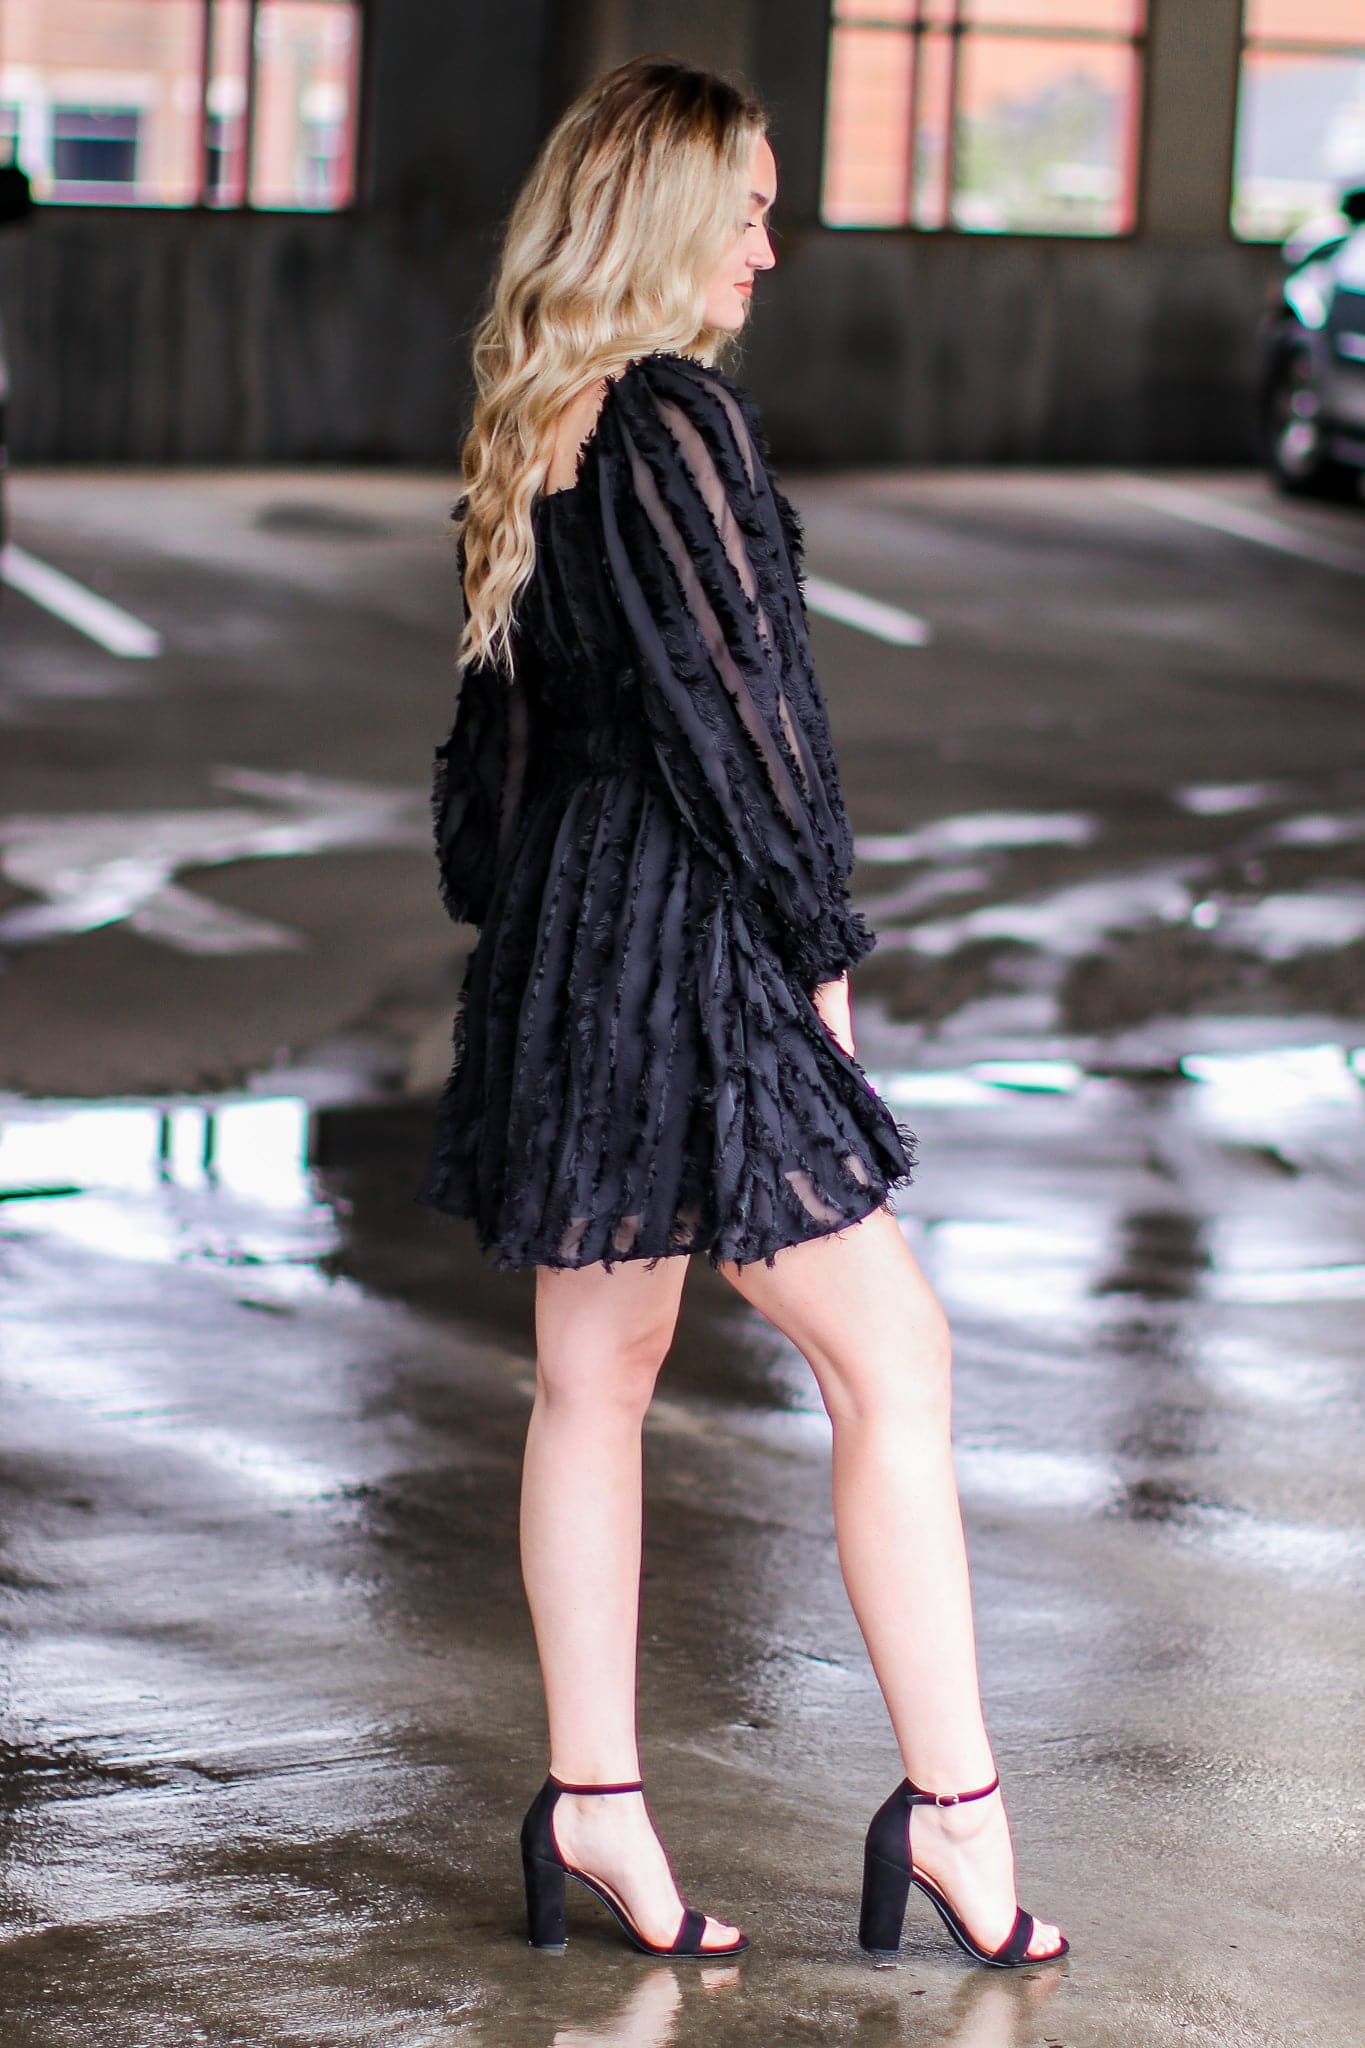  In Dreams Fringe Woven Sweetheart Dress - FINAL SALE - Madison and Mallory